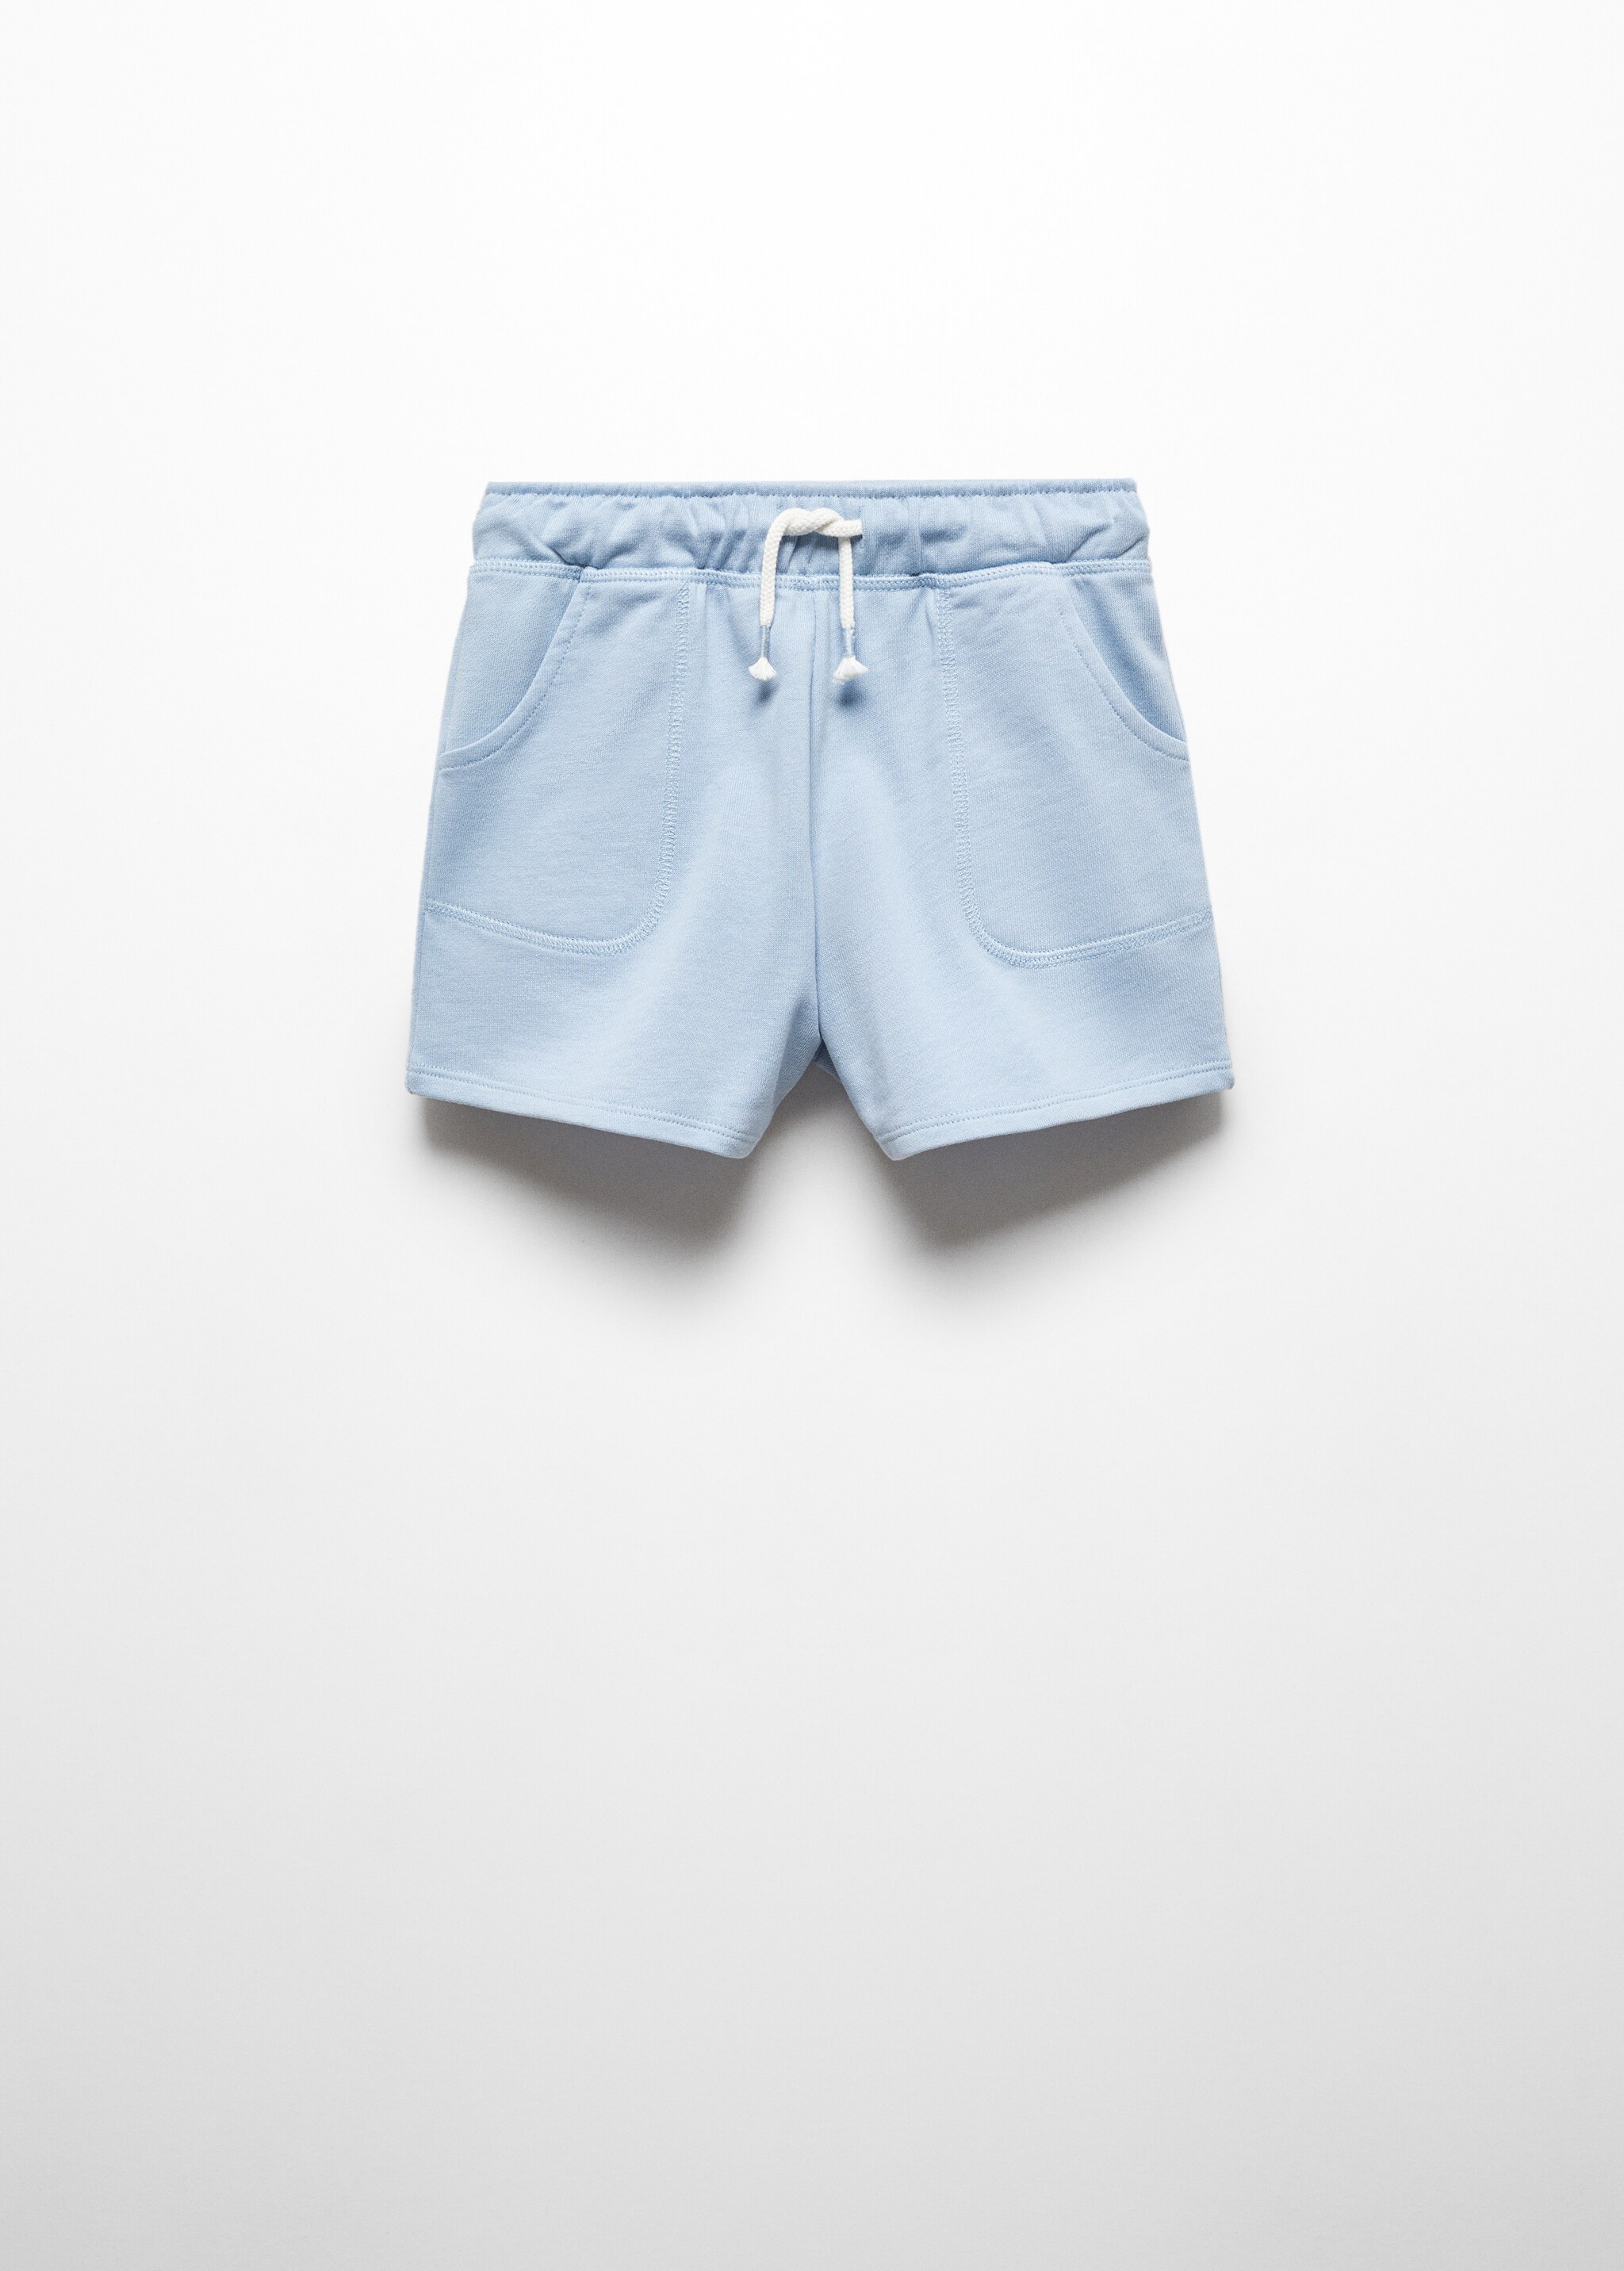 Cotton drawstring waist shorts - Article without model